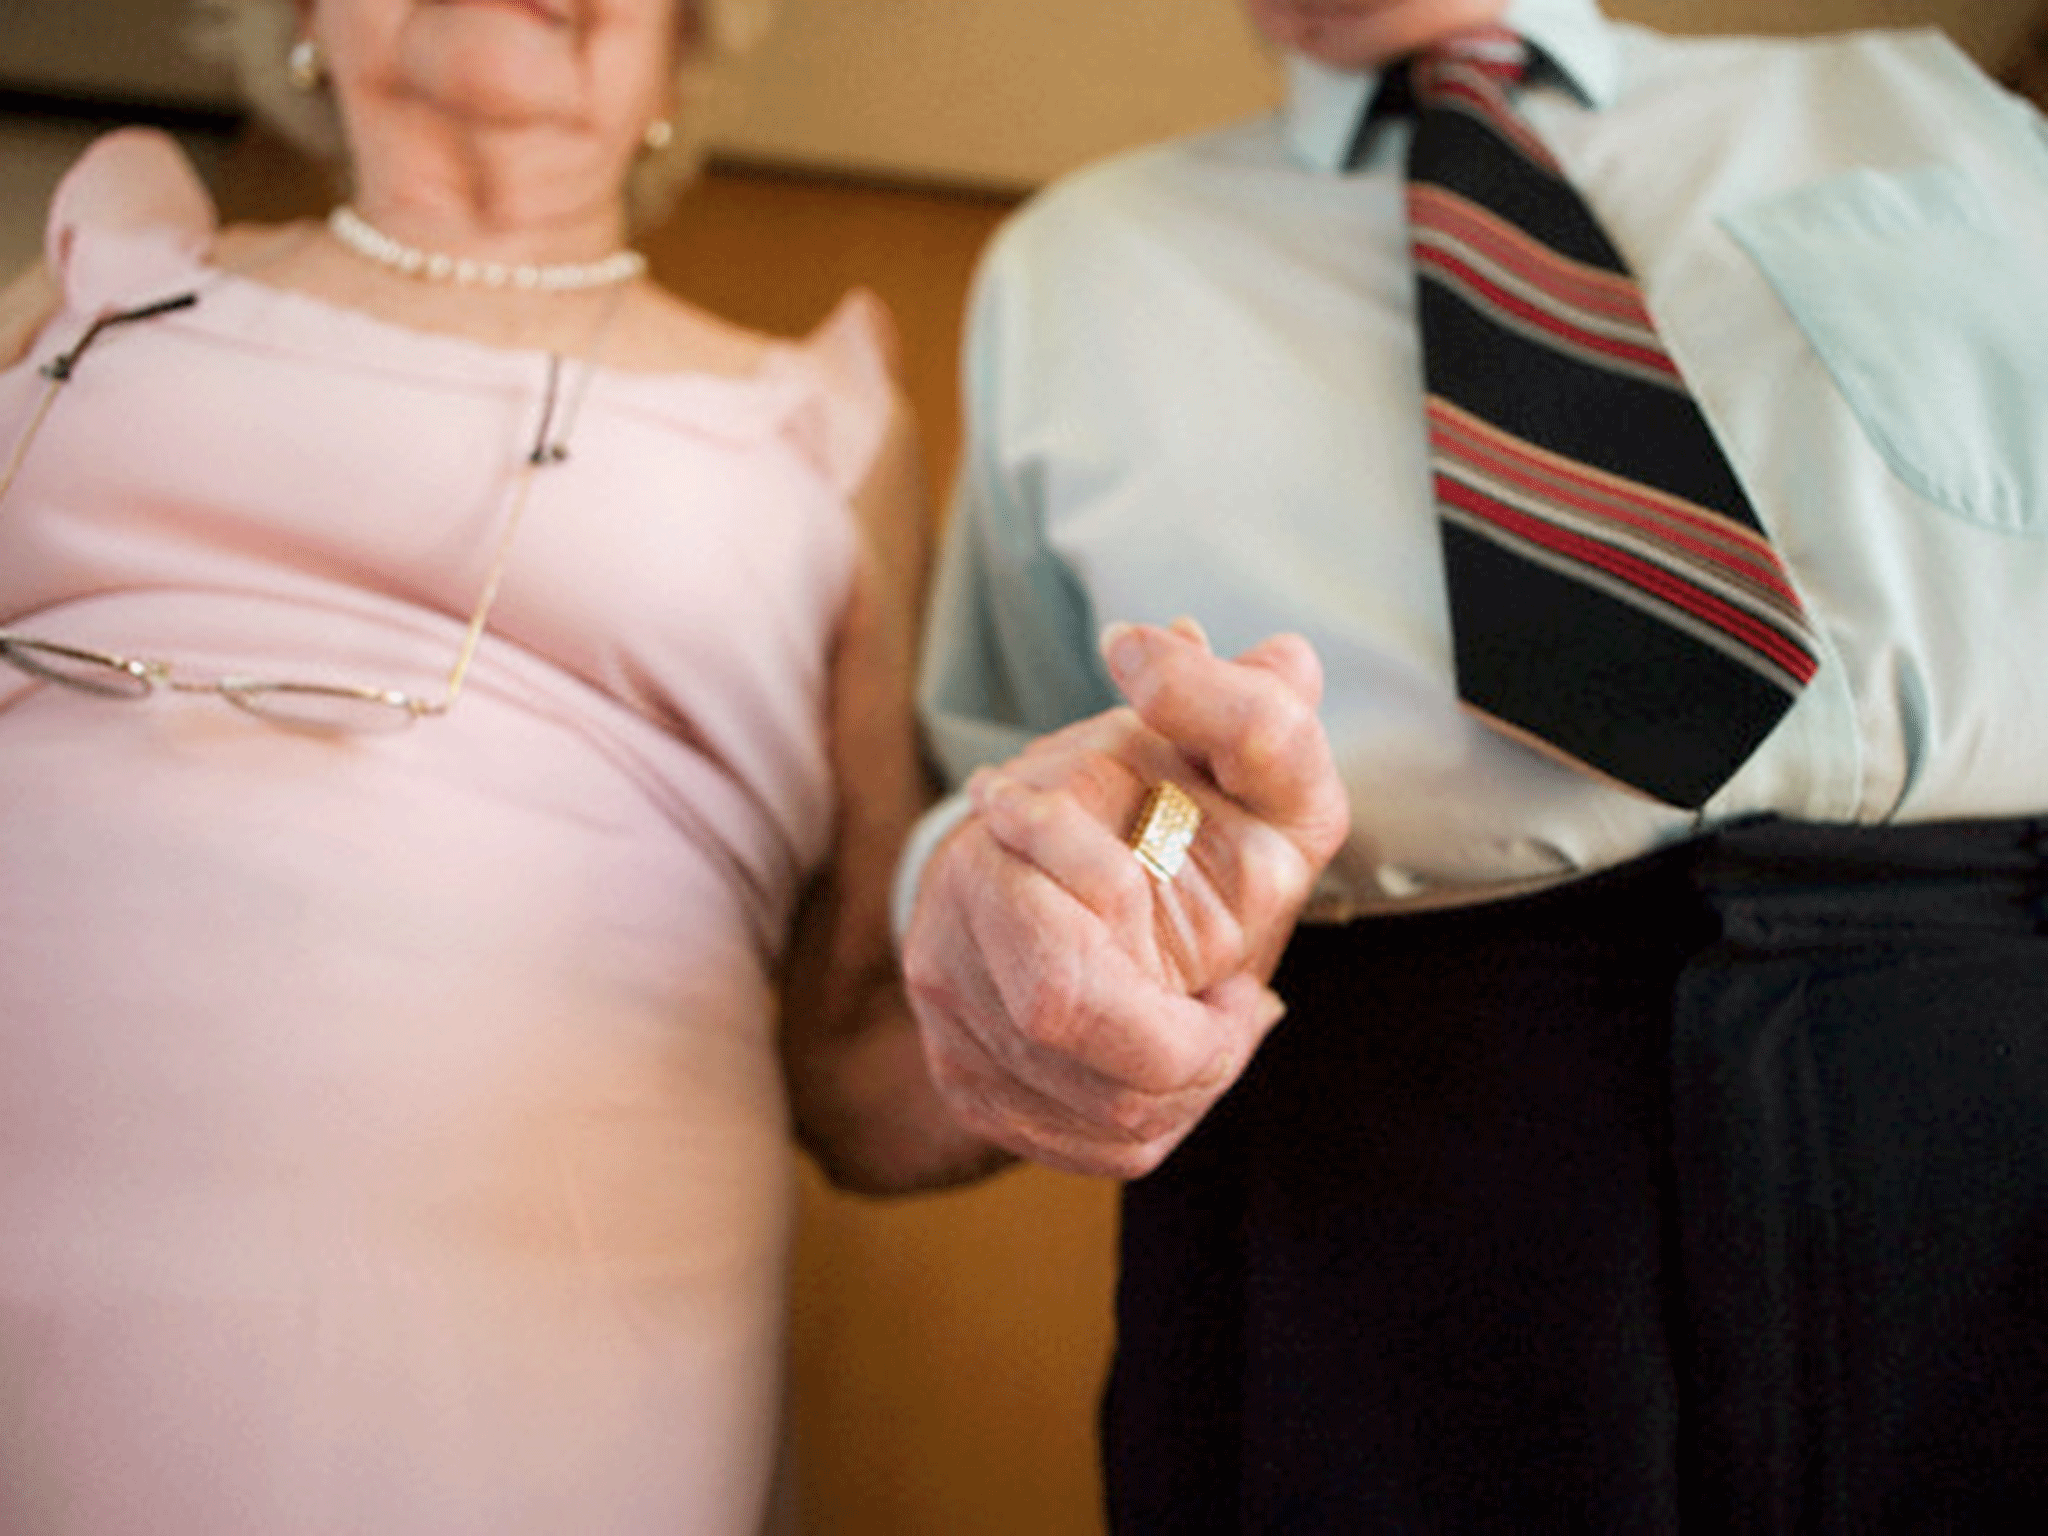 The pair had been married for 40 years before they both passed away